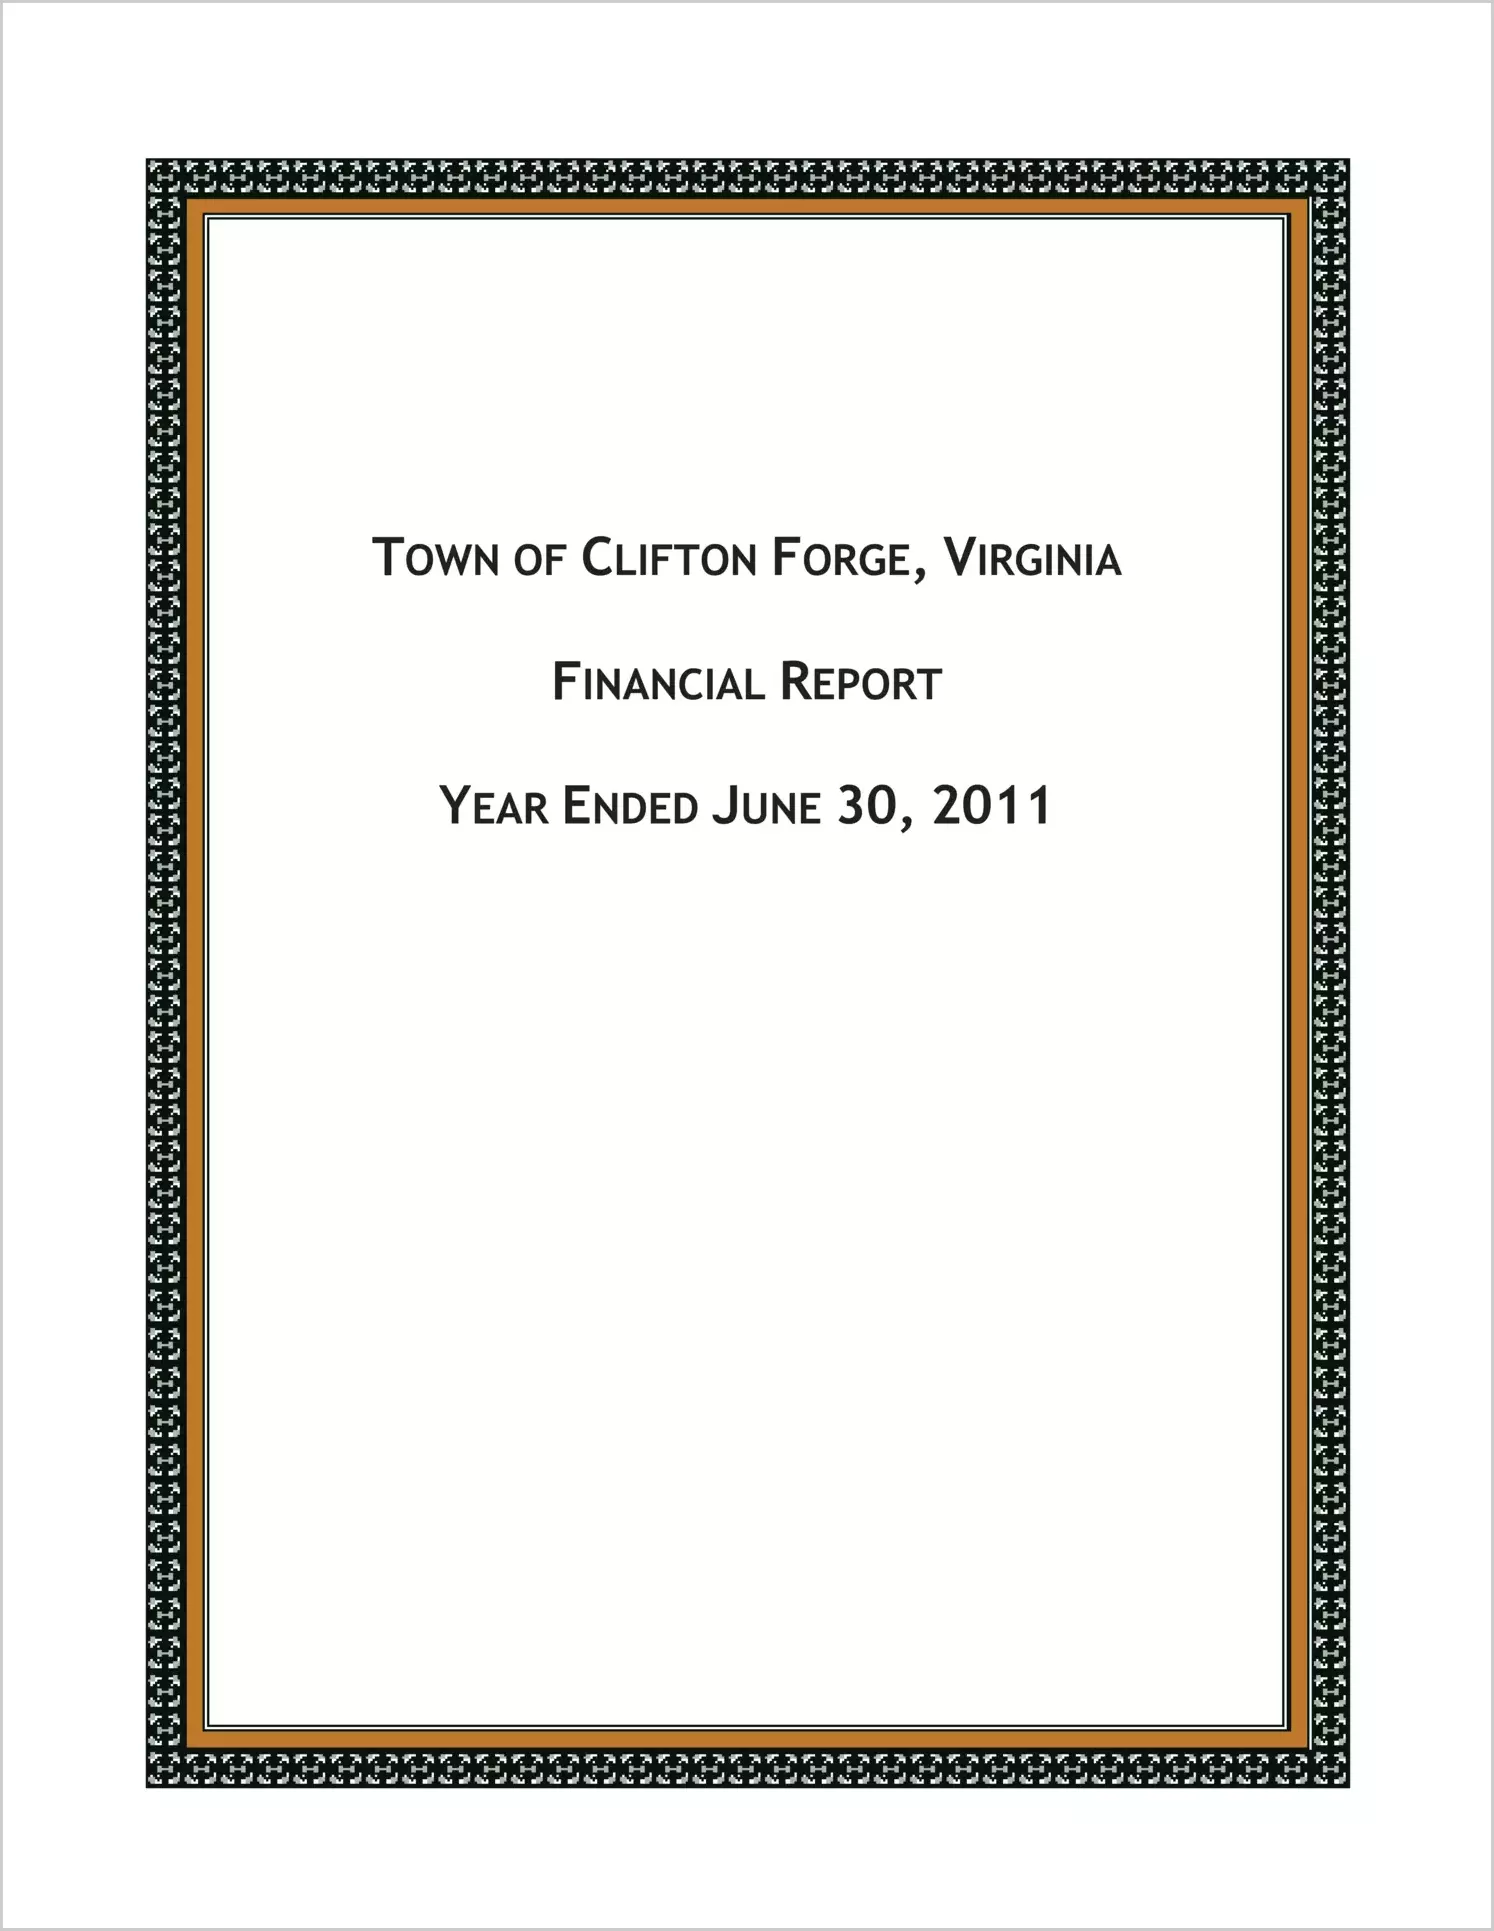 2011 Annual Financial Report for Town of Clifton Forge